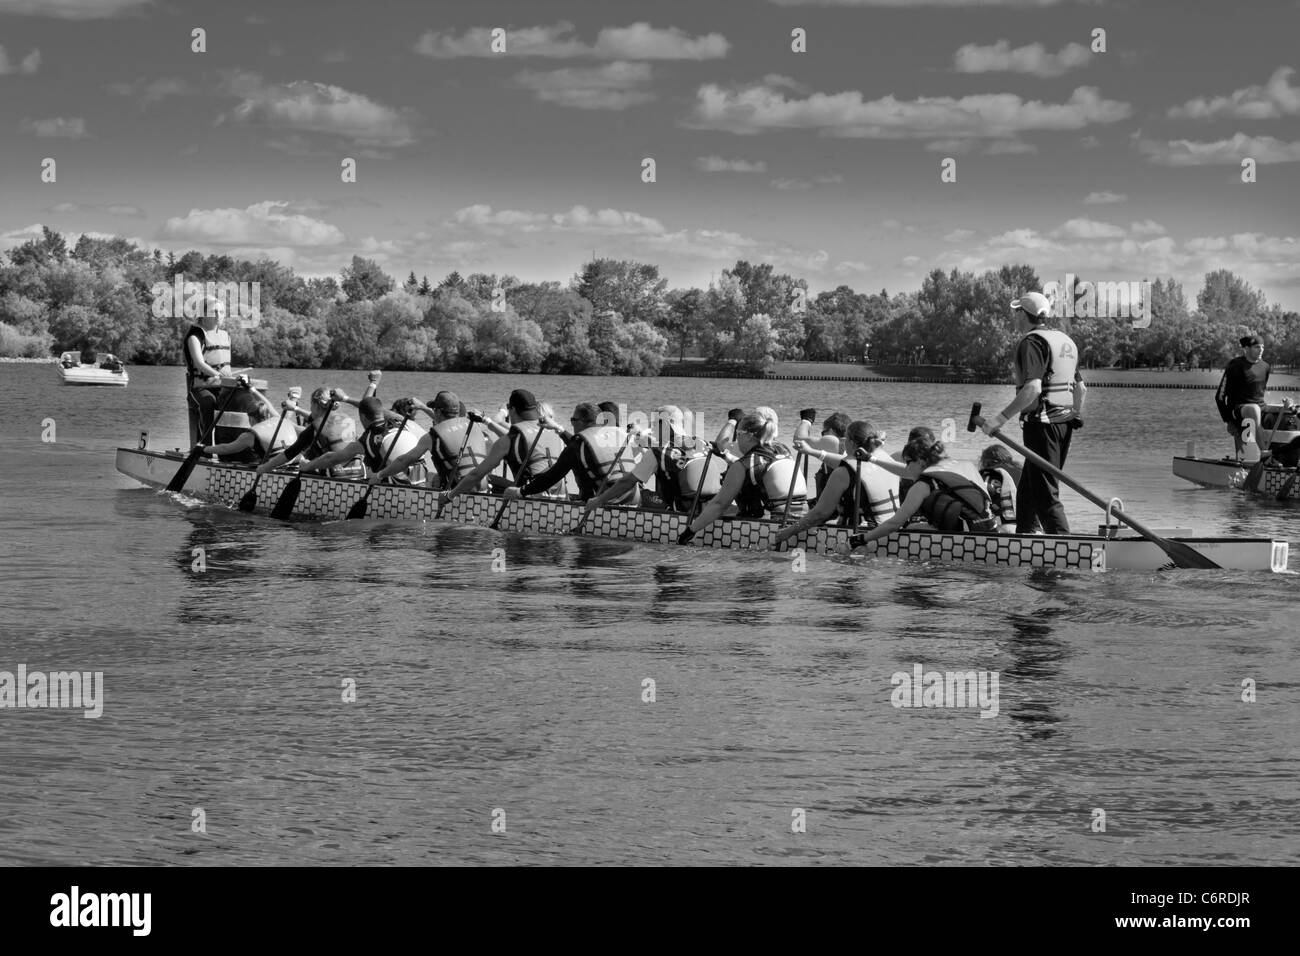 A team of dragon boat racers paddling their boat Stock Photo